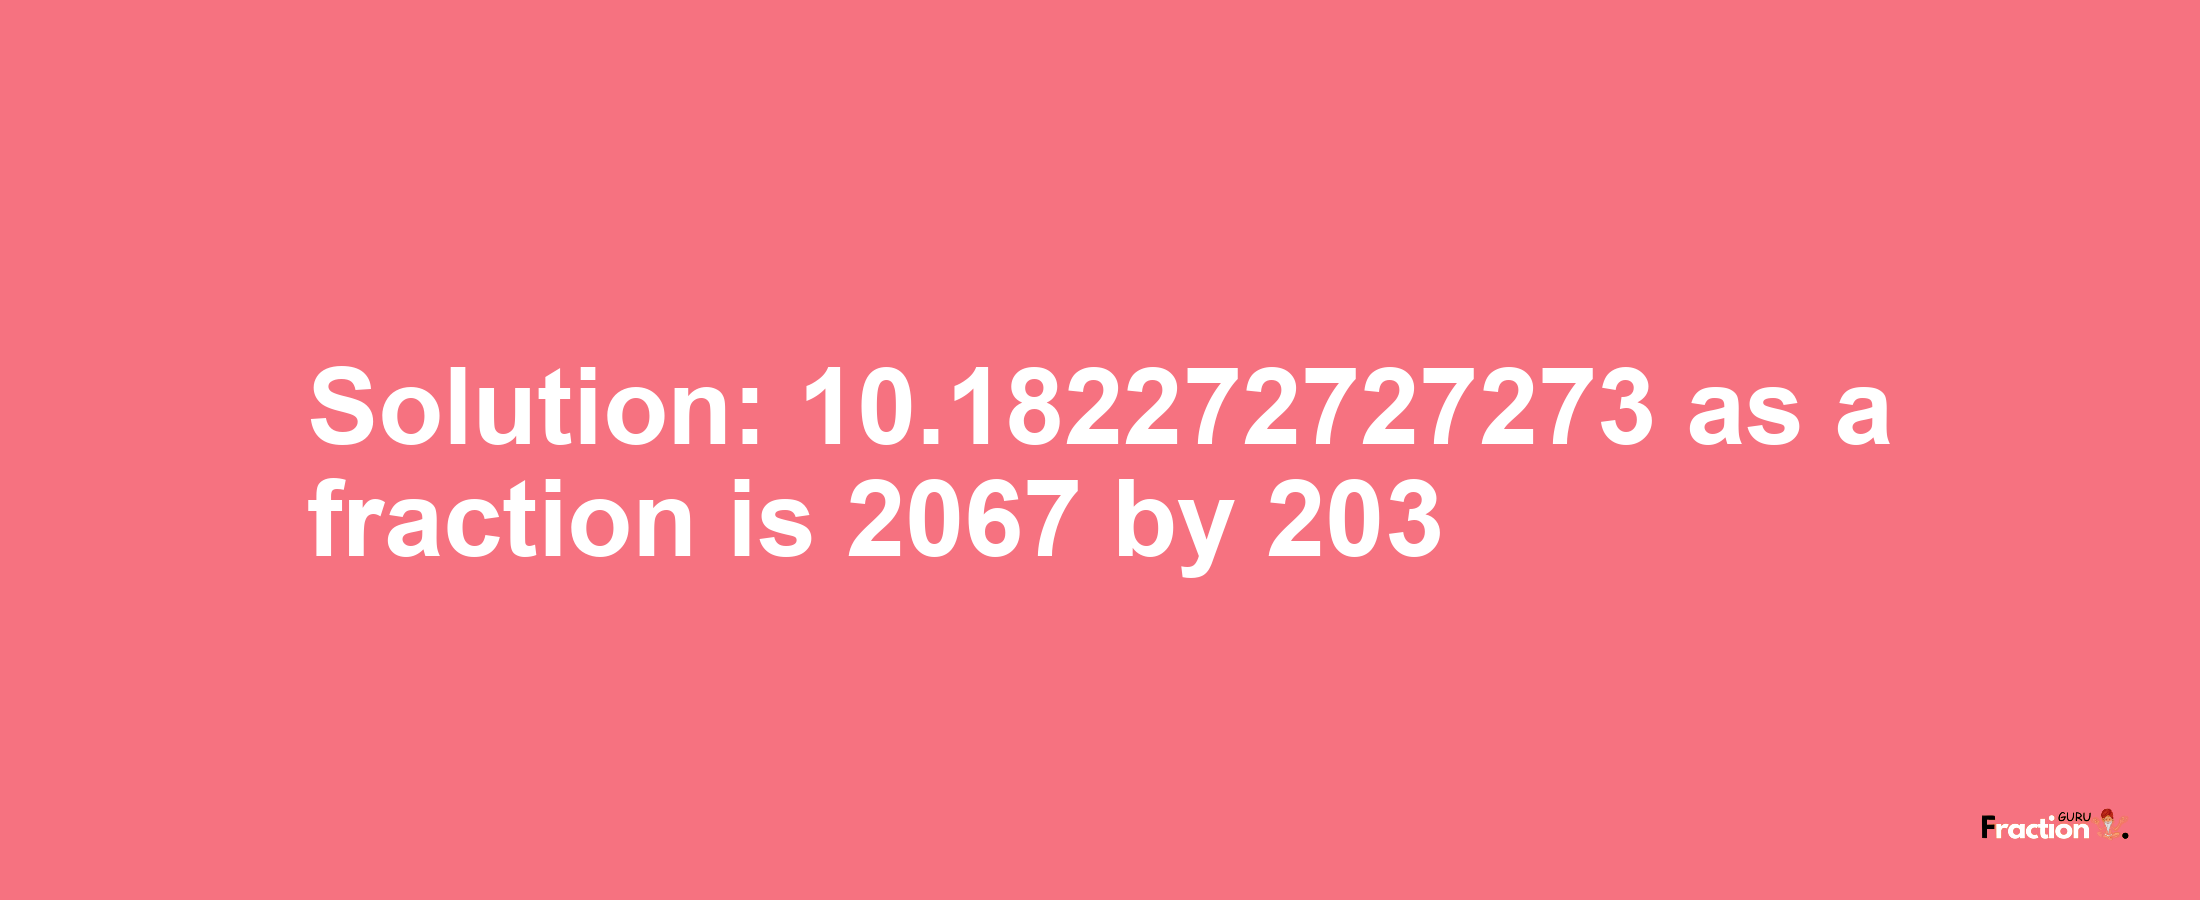 Solution:10.182272727273 as a fraction is 2067/203